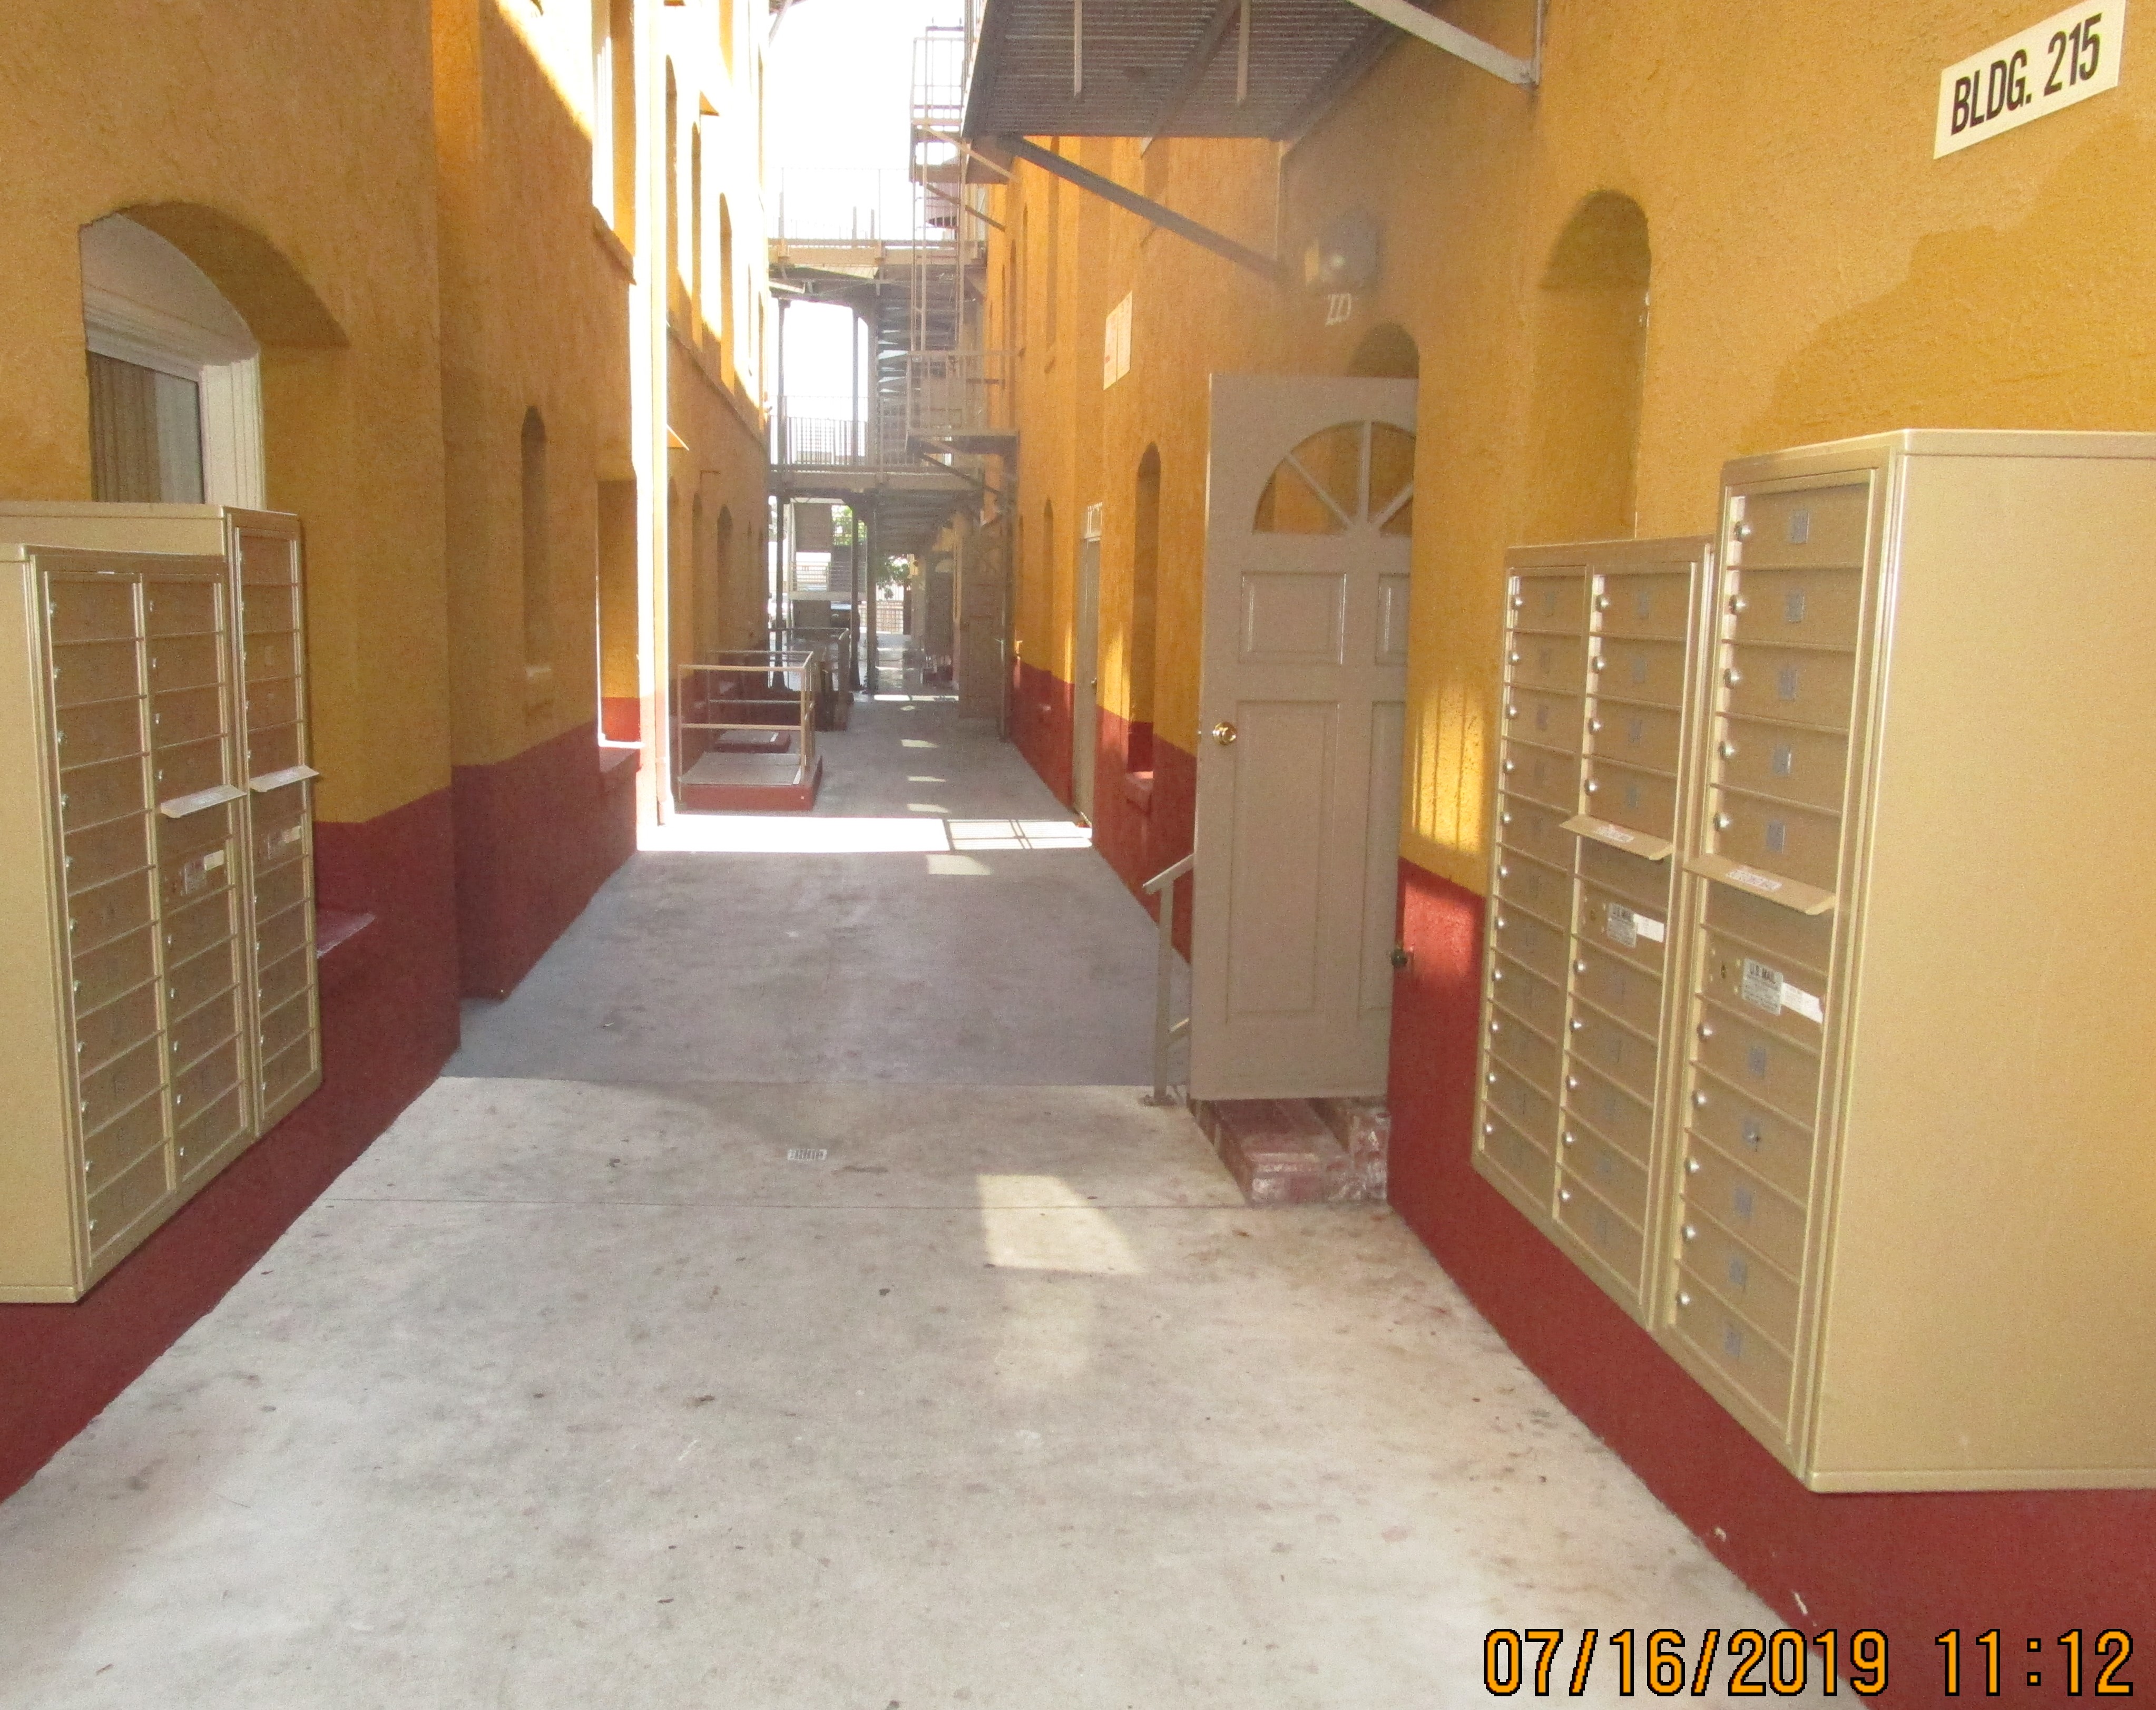 View of open hallway, units, mailboxes on each side.